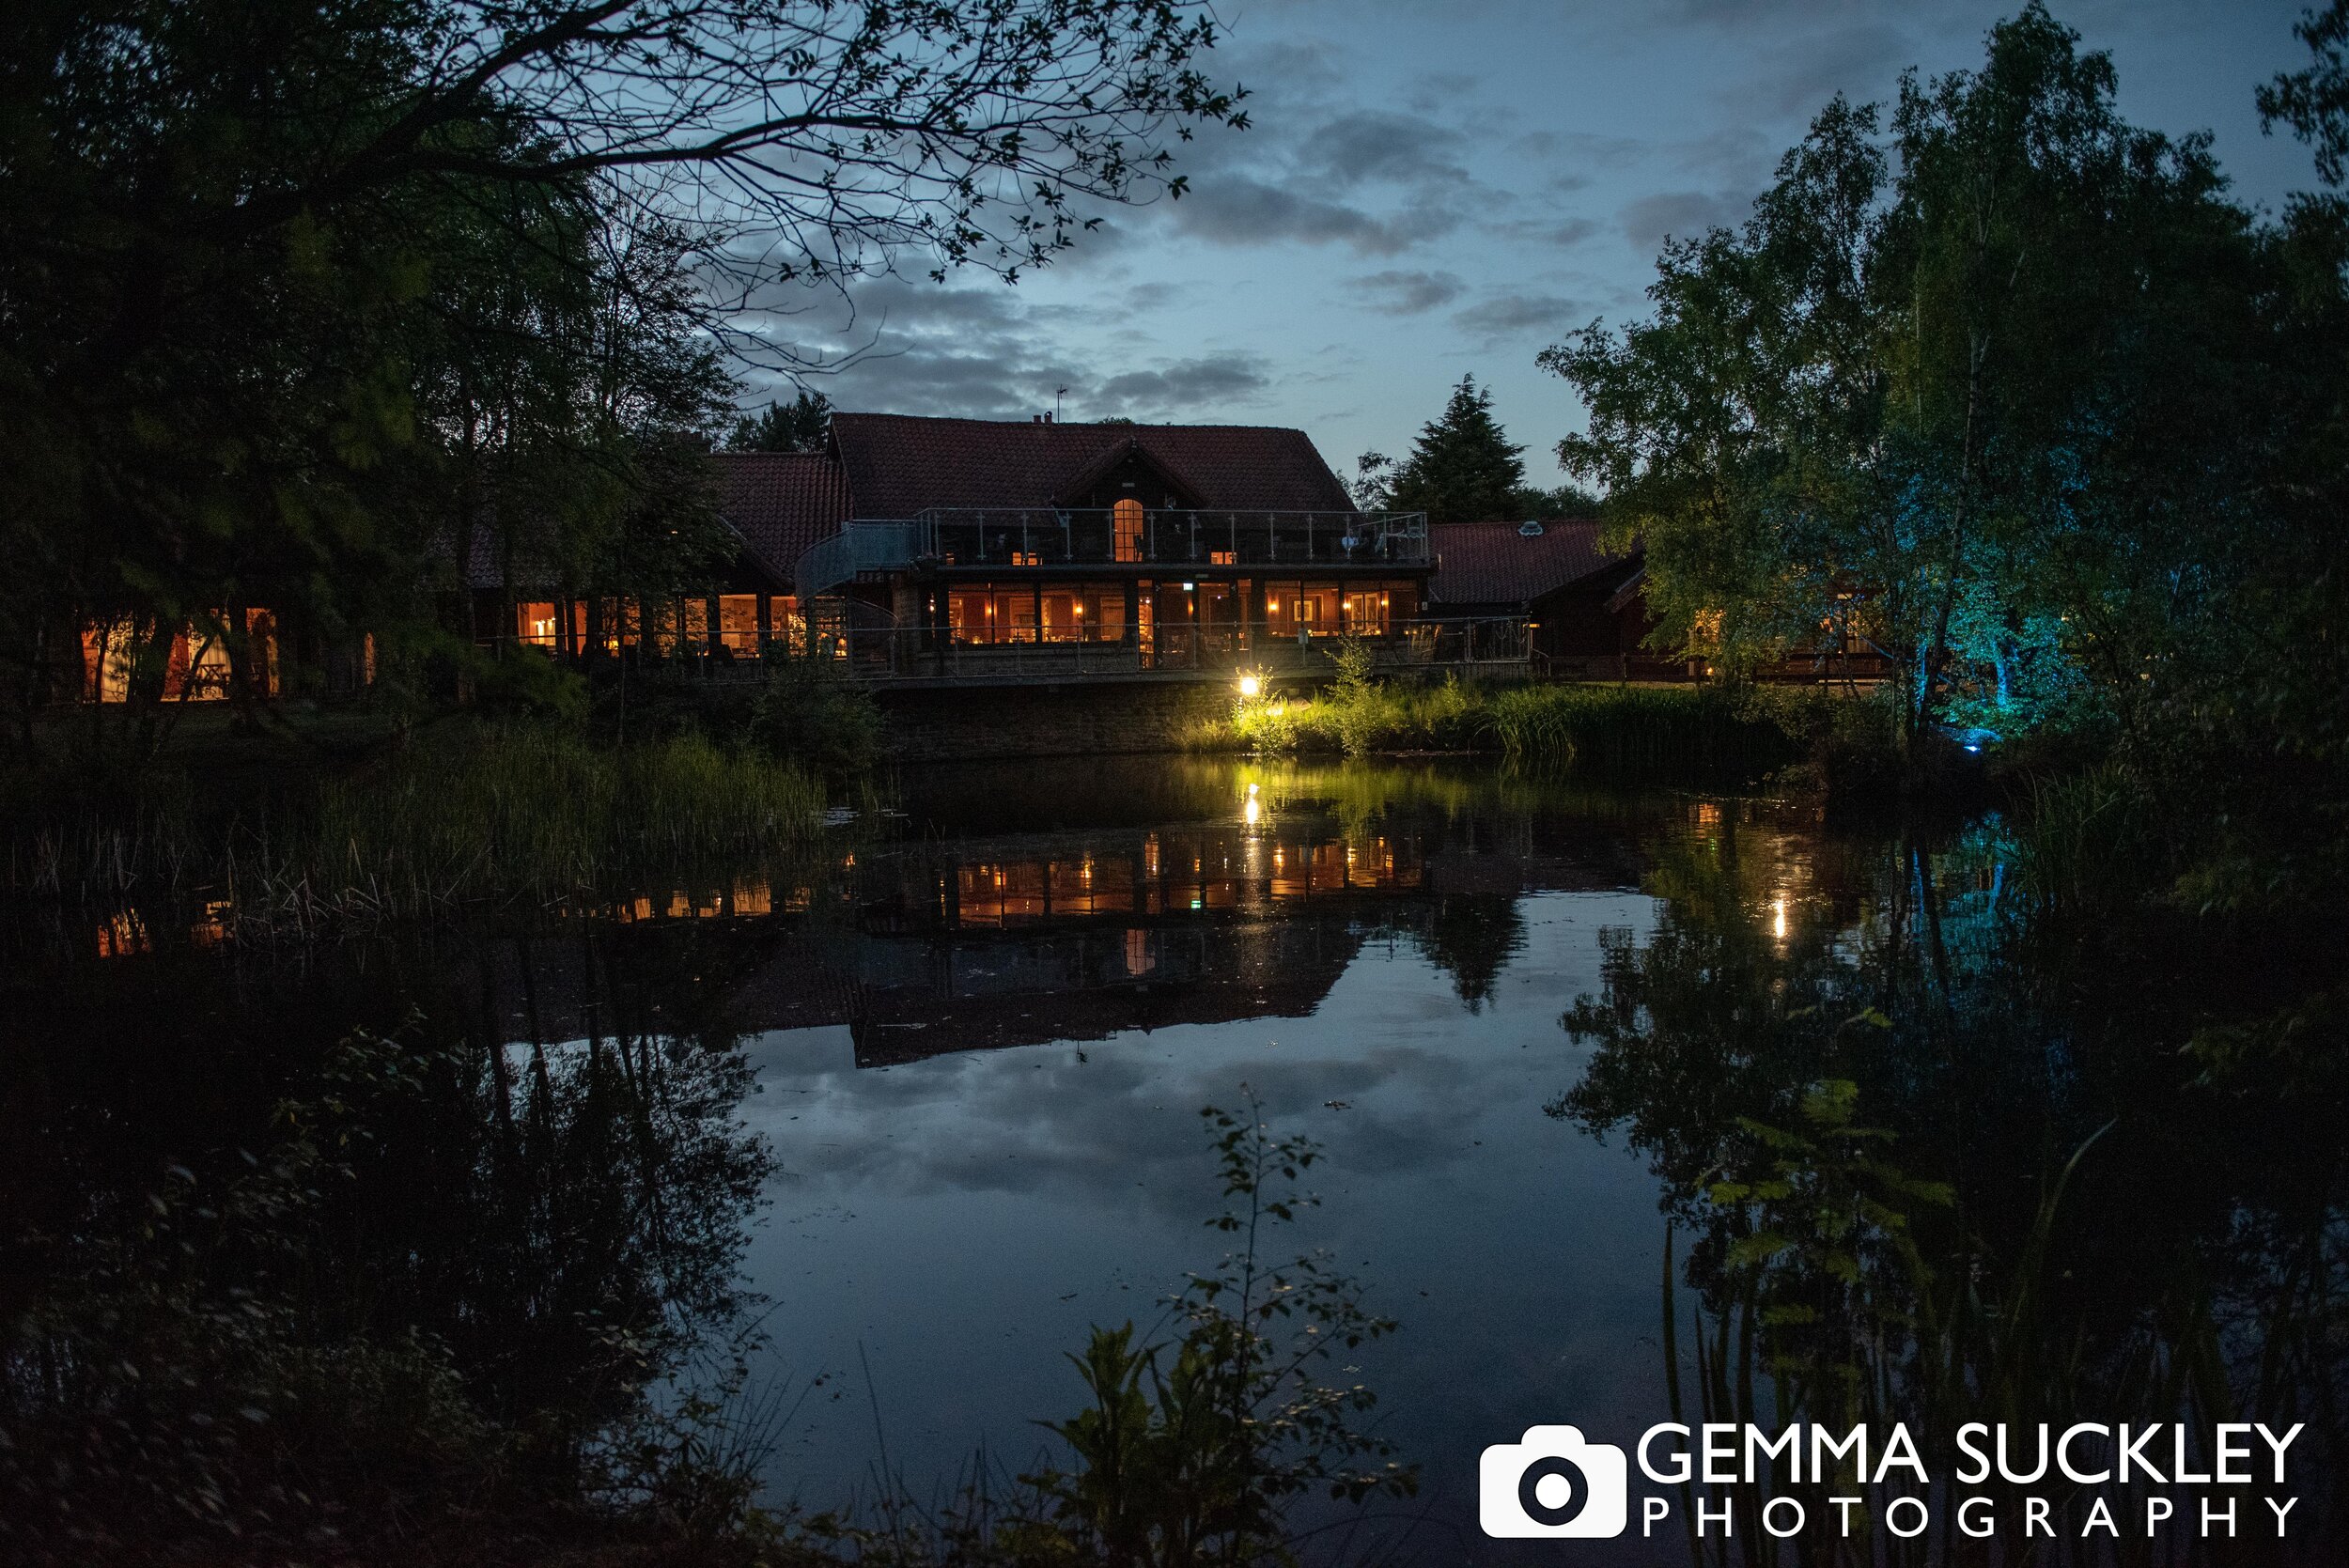 night time photo of the otley chevin hotel across the lake